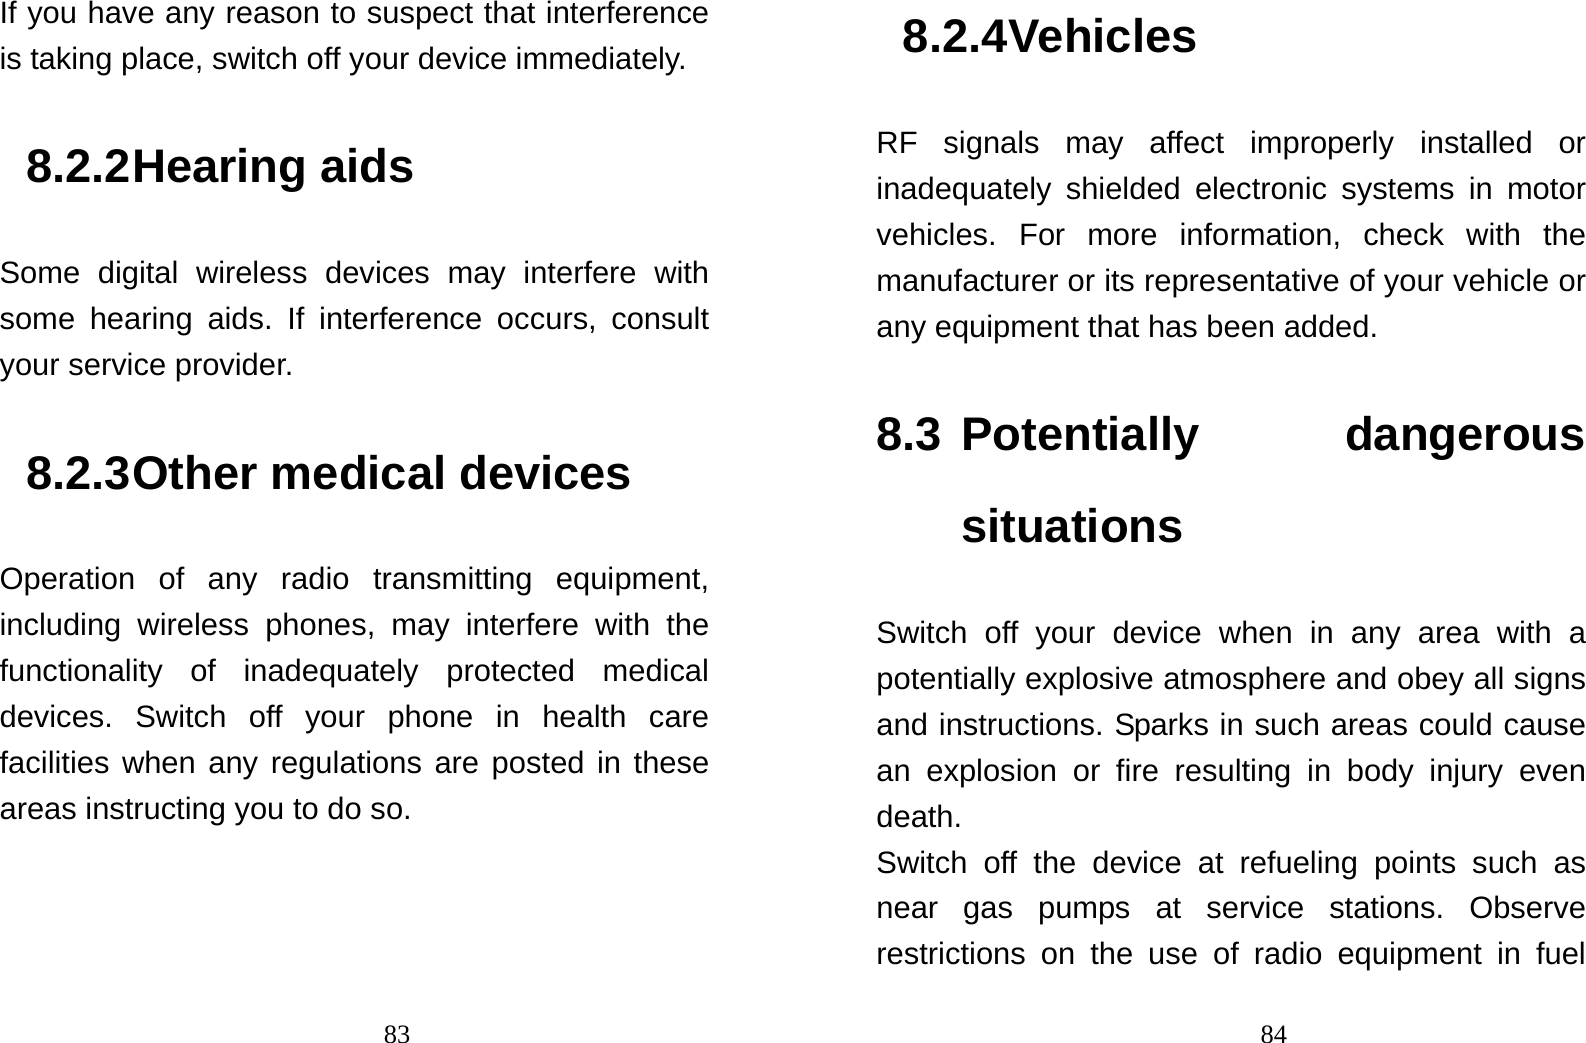                                83If you have any reason to suspect that interference is taking place, switch off your device immediately. 8.2.2 Hearing aids Some digital wireless devices may interfere with some hearing aids. If interference occurs, consult your service provider. 8.2.3 Other medical devices Operation of any radio transmitting equipment, including wireless phones, may interfere with the functionality of inadequately protected medical devices. Switch off your phone in health care facilities when any regulations are posted in these areas instructing you to do so.                                848.2.4 Vehicles RF signals may affect improperly installed or inadequately shielded electronic systems in motor vehicles. For more information, check with the manufacturer or its representative of your vehicle or any equipment that has been added. 8.3 Potentially  dangerous situations Switch off your device when in any area with a potentially explosive atmosphere and obey all signs and instructions. Sparks in such areas could cause an explosion or fire resulting in body injury even death. Switch off the device at refueling points such as near gas pumps at service stations. Observe restrictions on the use of radio equipment in fuel 